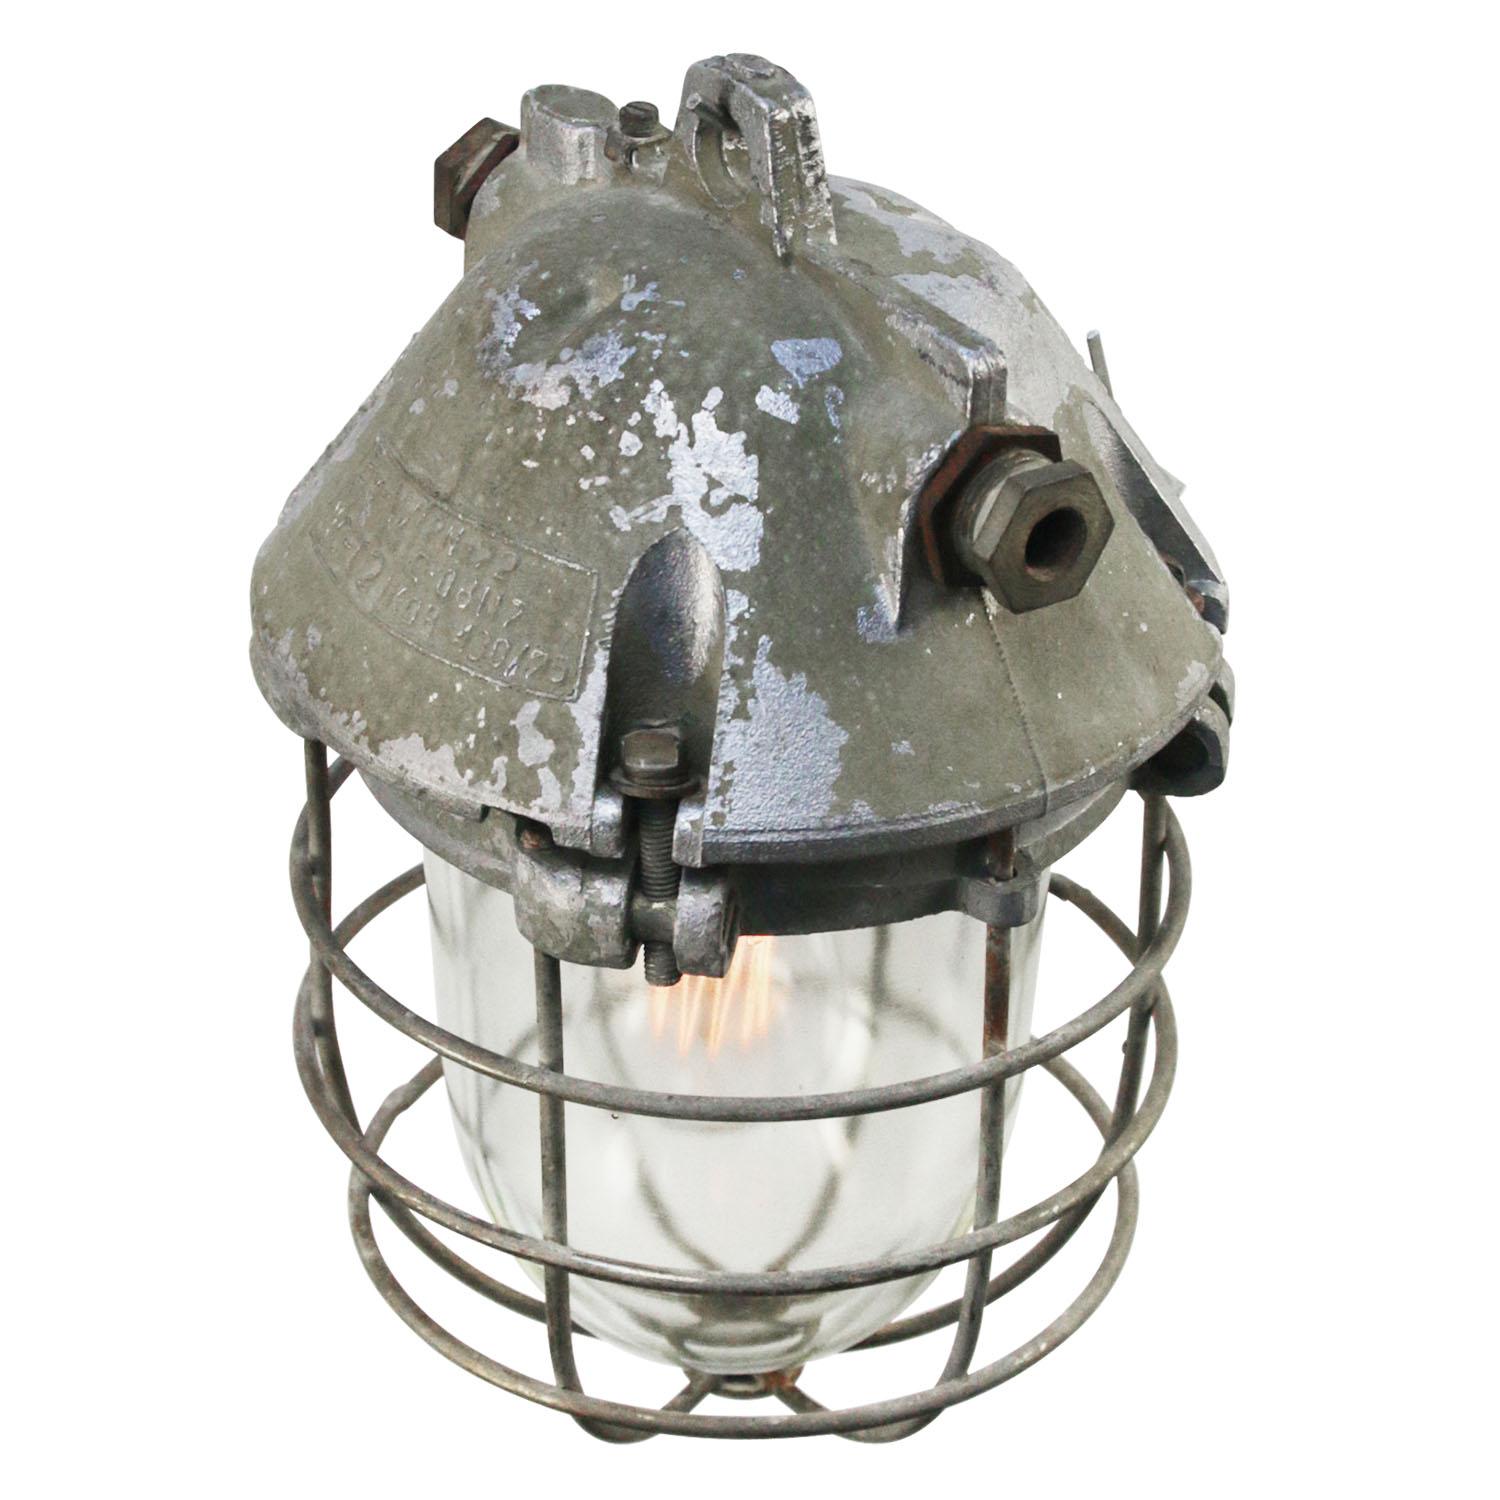 Vintage European industrial hanging lamp.
Cast aluminum with clear glass.

Weight 5.00 kg / 11 lb

Priced per individual item. All lamps have been made suitable by international standards for incandescent light bulbs, energy-efficient and LED